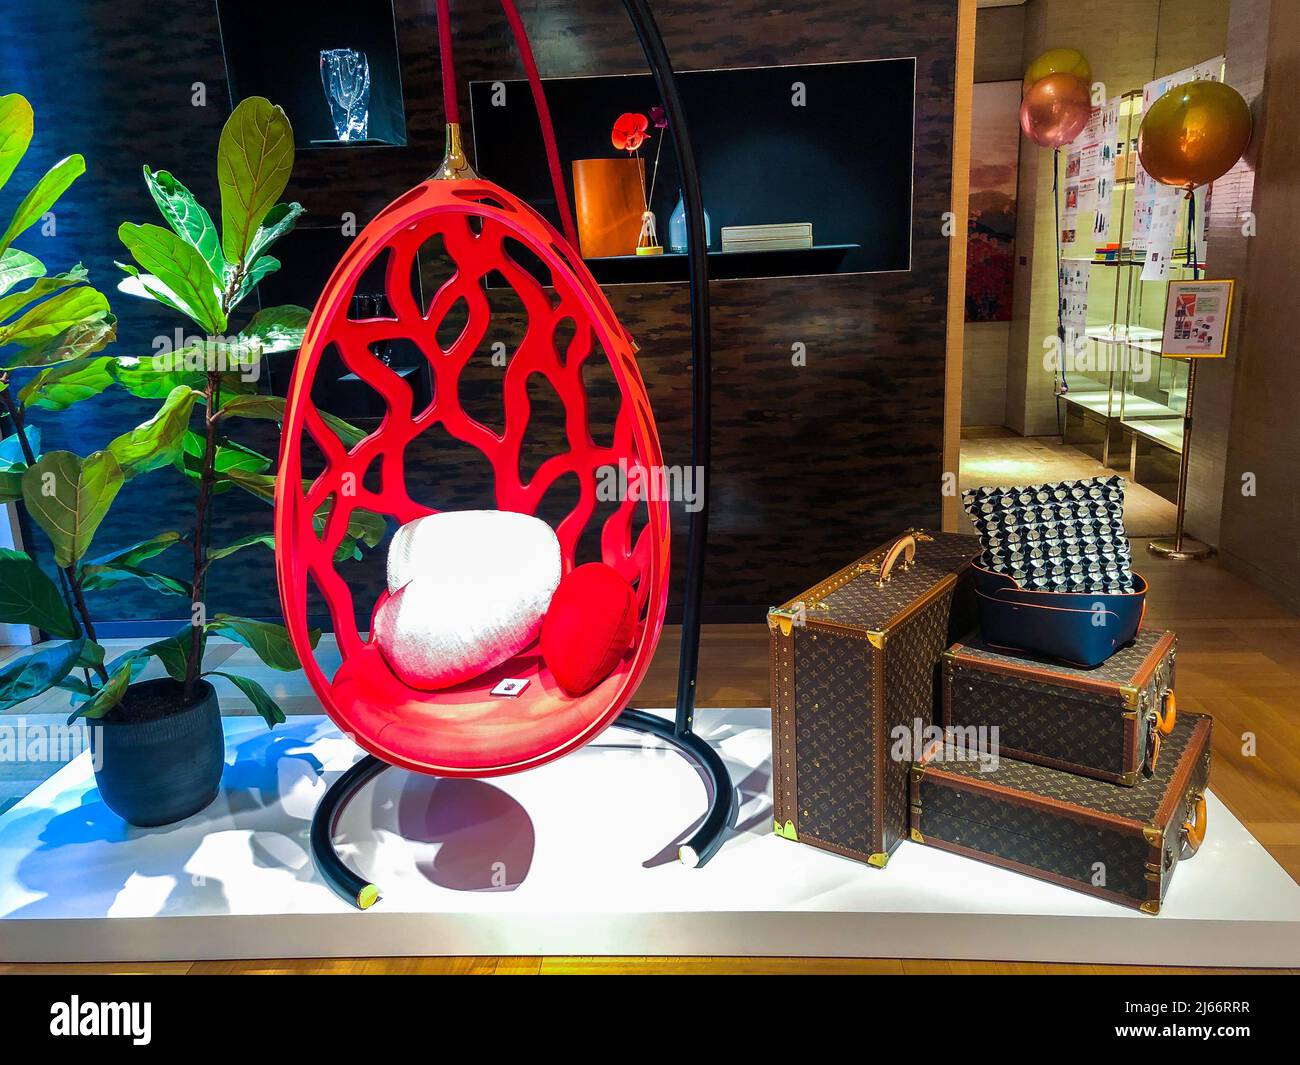 Paris, France, Louis Vuitton Luggage on Display in LVMH Store Stock Photo -  Alamy